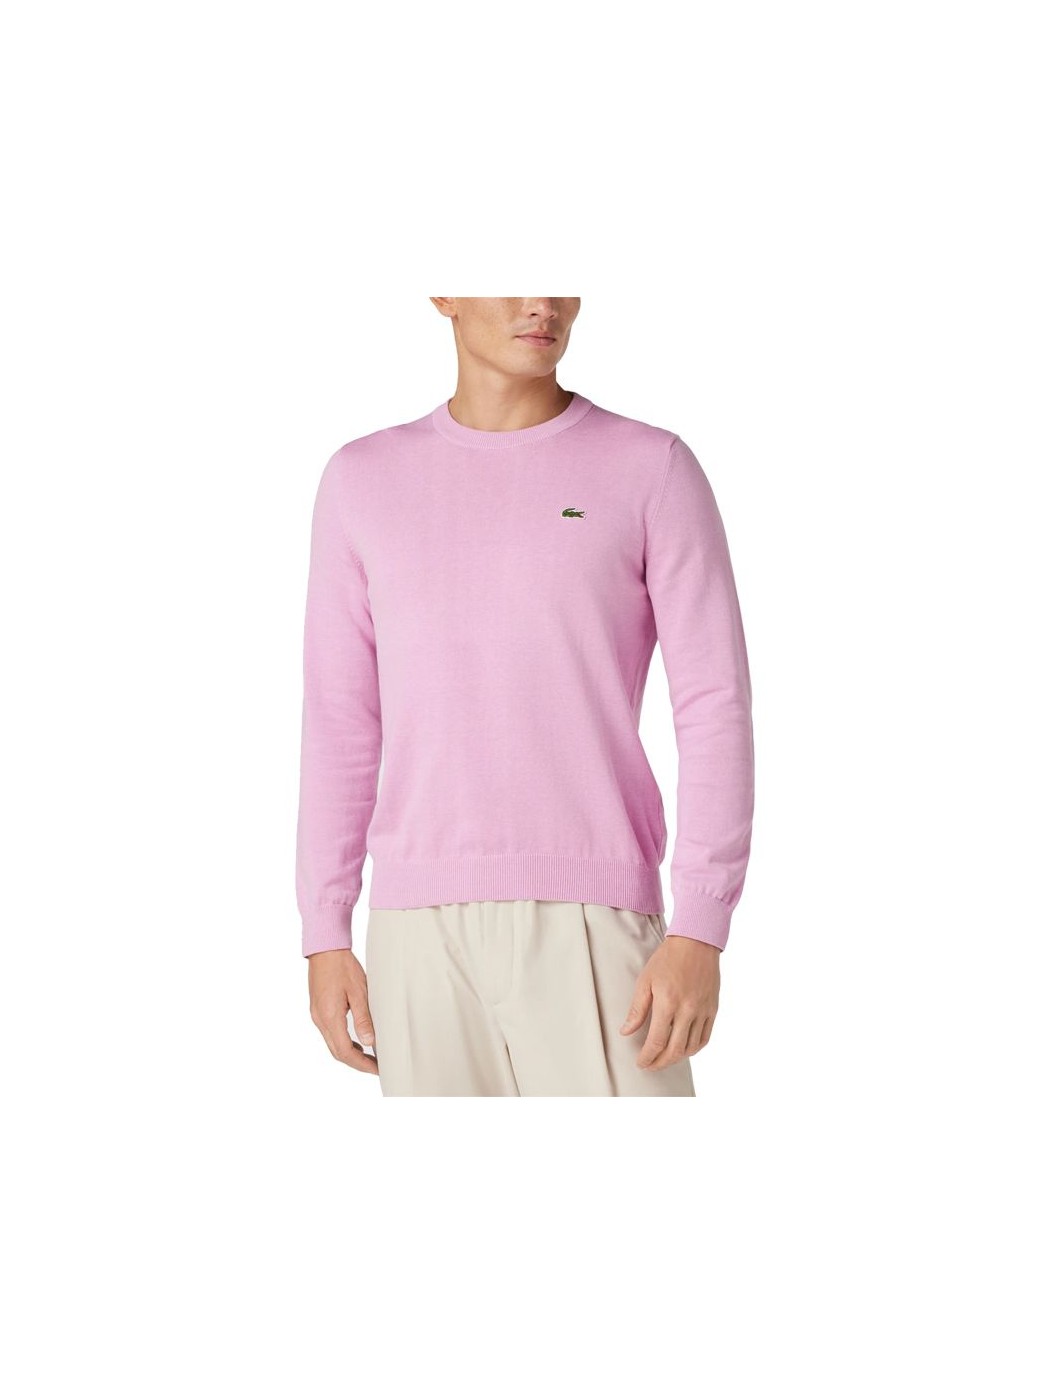 PULLOVER LACOSTE AH0128 IXV